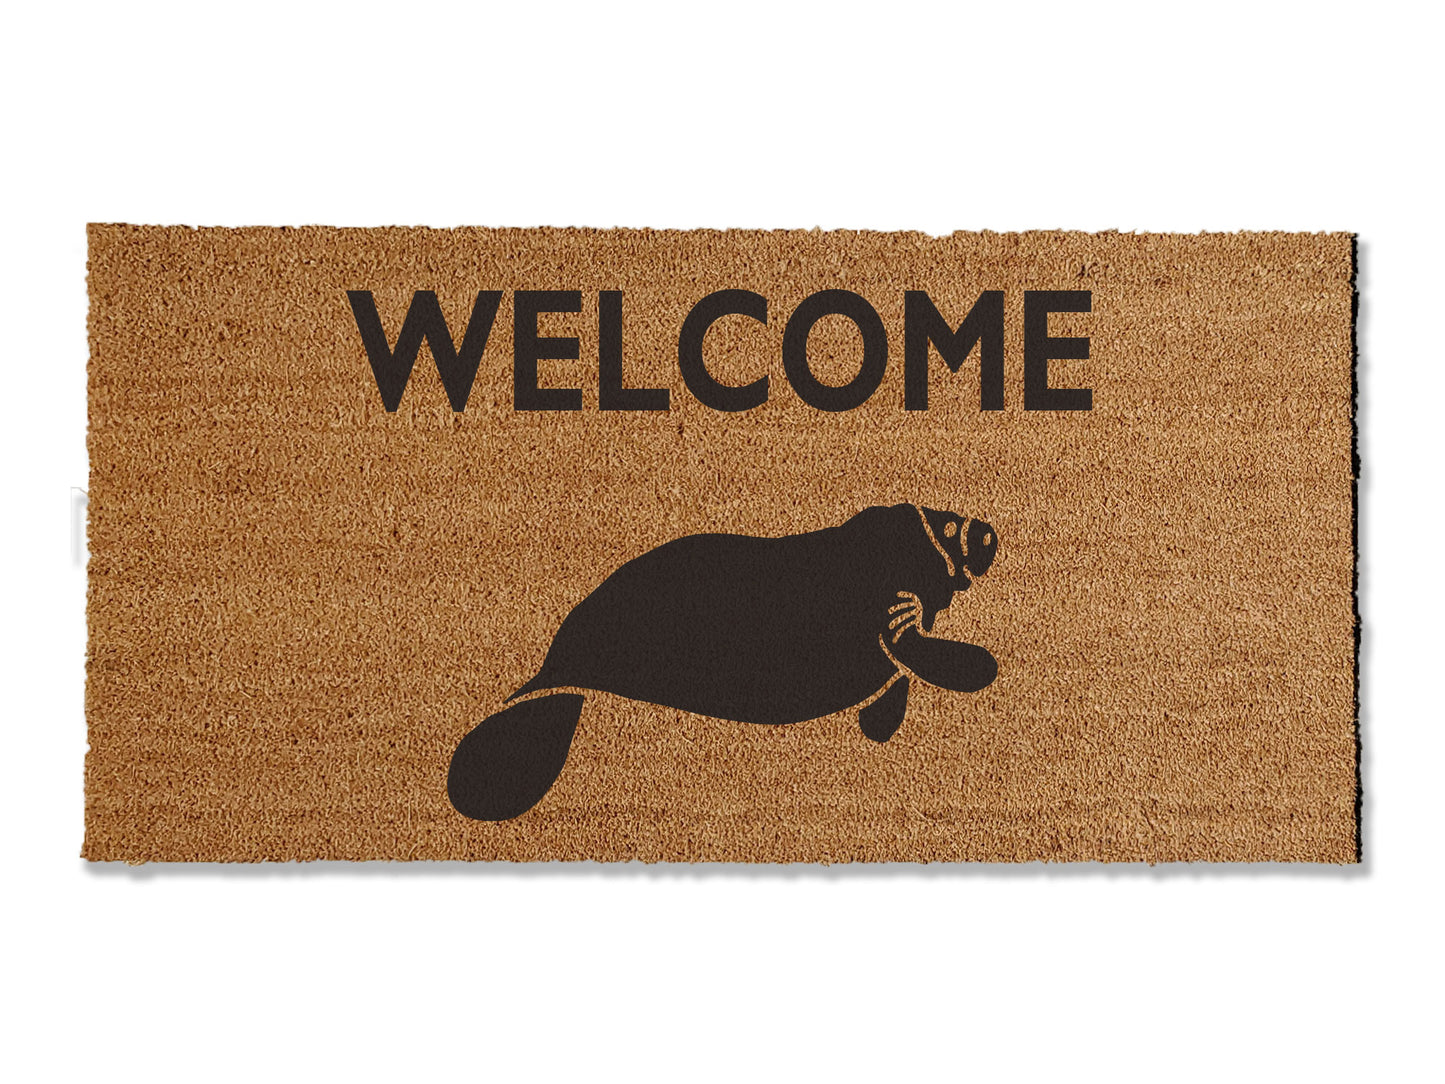 Welcome guests with our adorable coir doormat featuring a charming manatee design. Available in multiple sizes, this delightful mat not only adds a touch of sea-loving charm to your entryway but is also highly effective at trapping dirt. Spread love for these cute sea cows and enhance your doorstep with this functional and whimsical coir doormat.